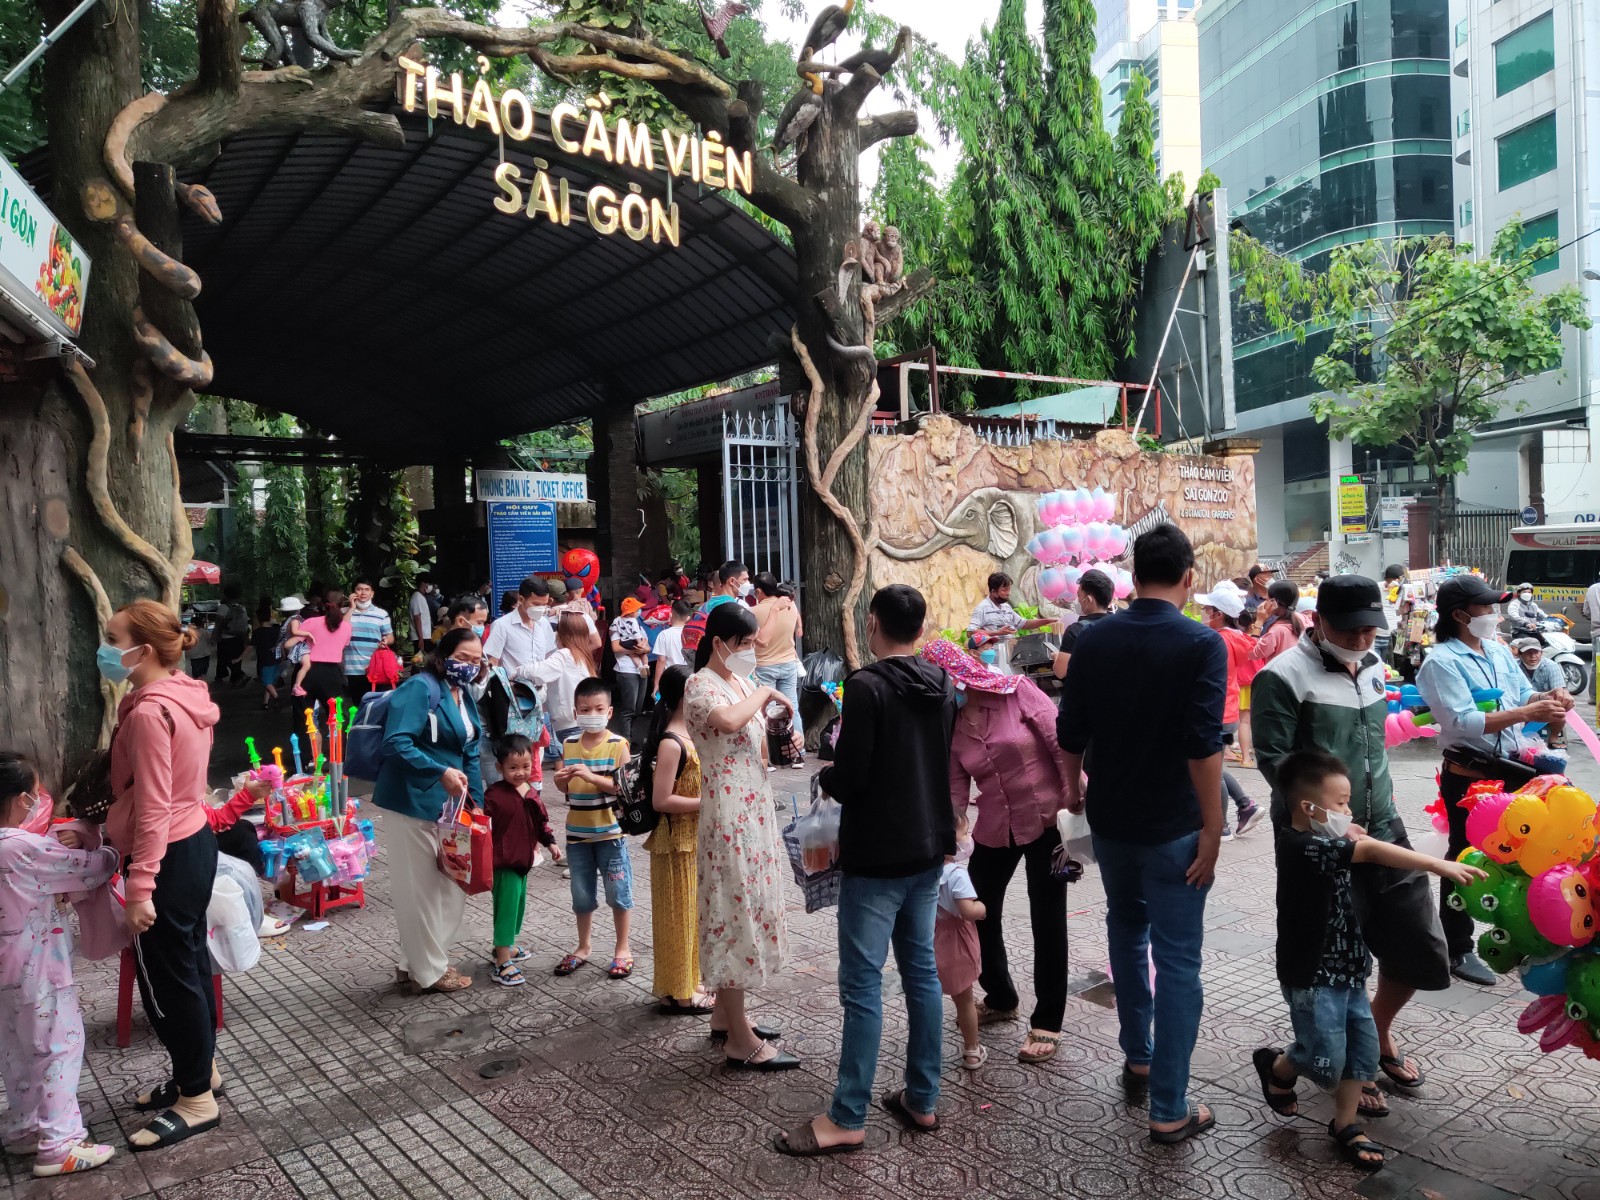 Visitors throng entertainment sites in Ho Chi Minh City as public holiday begins